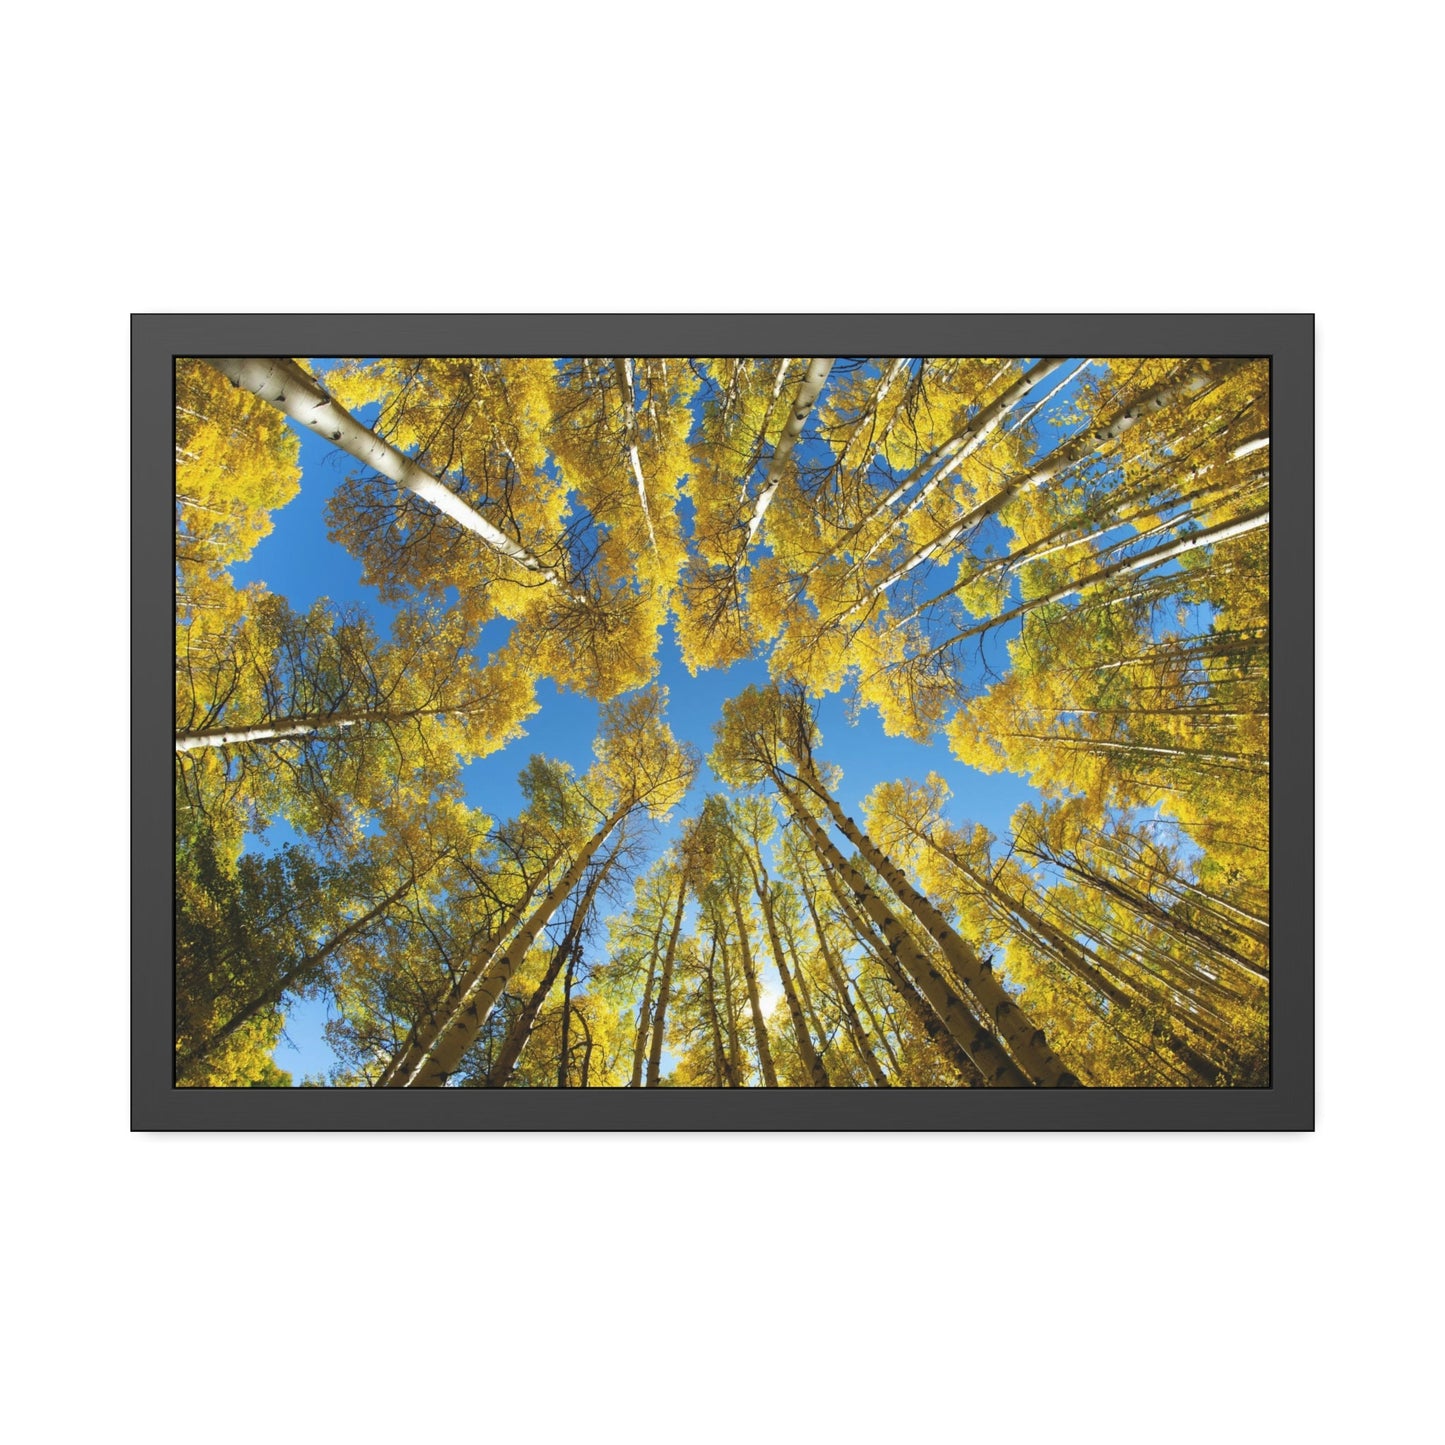 The Beauty of Nature: Rustic Framed Canvas Print of a Birch Tree Grove